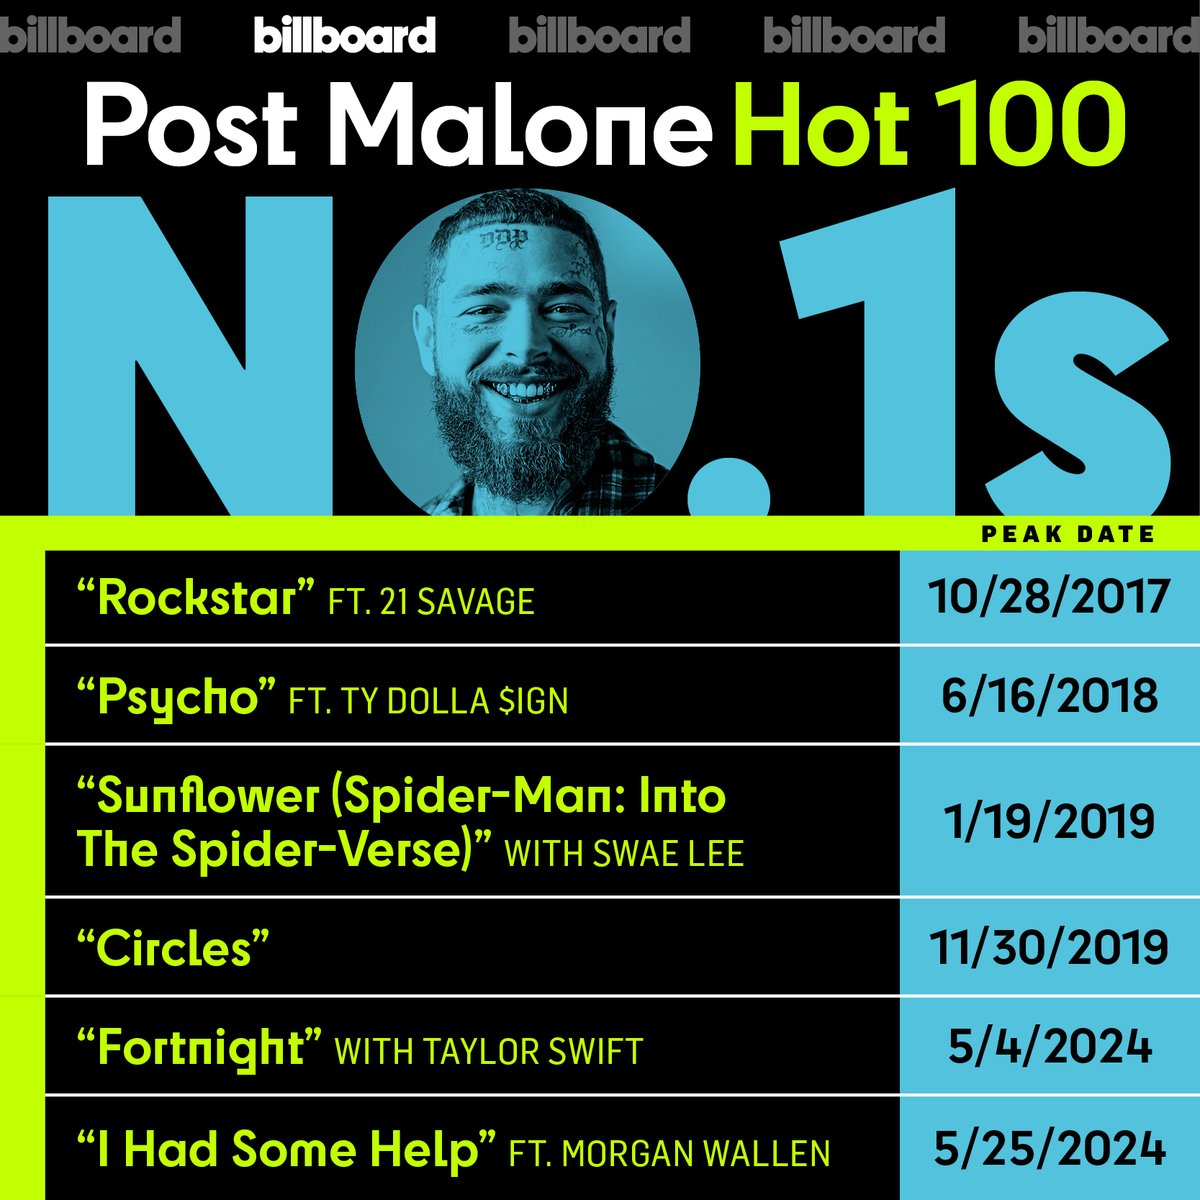 .@PostMalone scores his sixth career No. 1 hit on the #Hot100 this week with “I Had Some Help,” featuring @MorganWallen.

The song debuts with 76.4 million official U.S. streams, the largest single-week streaming sum since Billboard chart calculations began including only